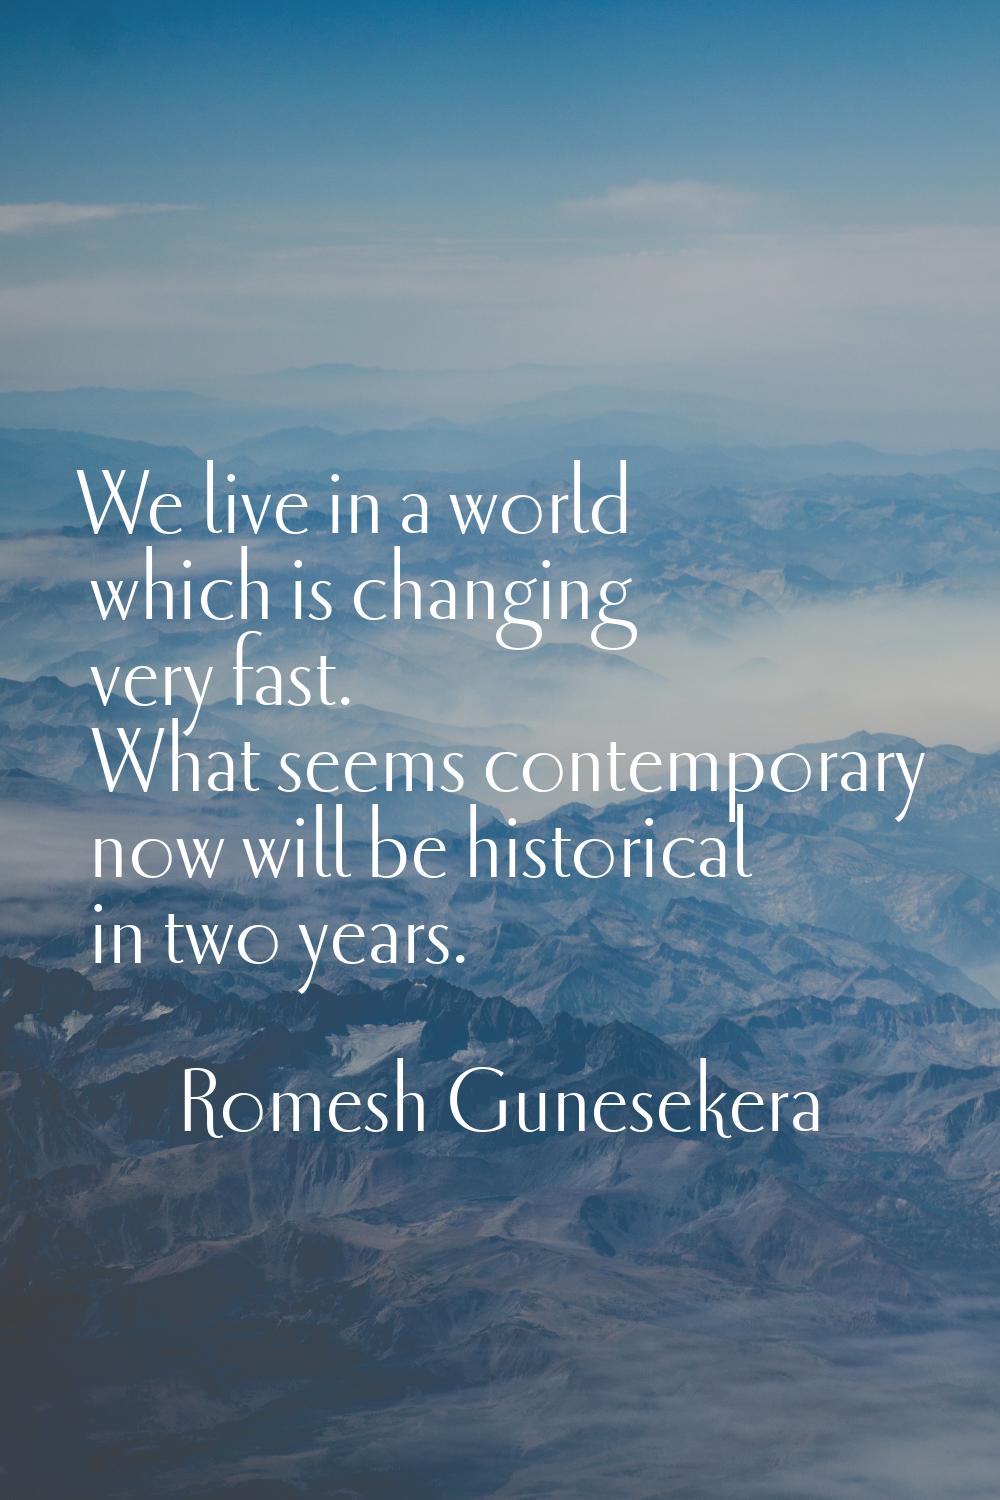 We live in a world which is changing very fast. What seems contemporary now will be historical in t